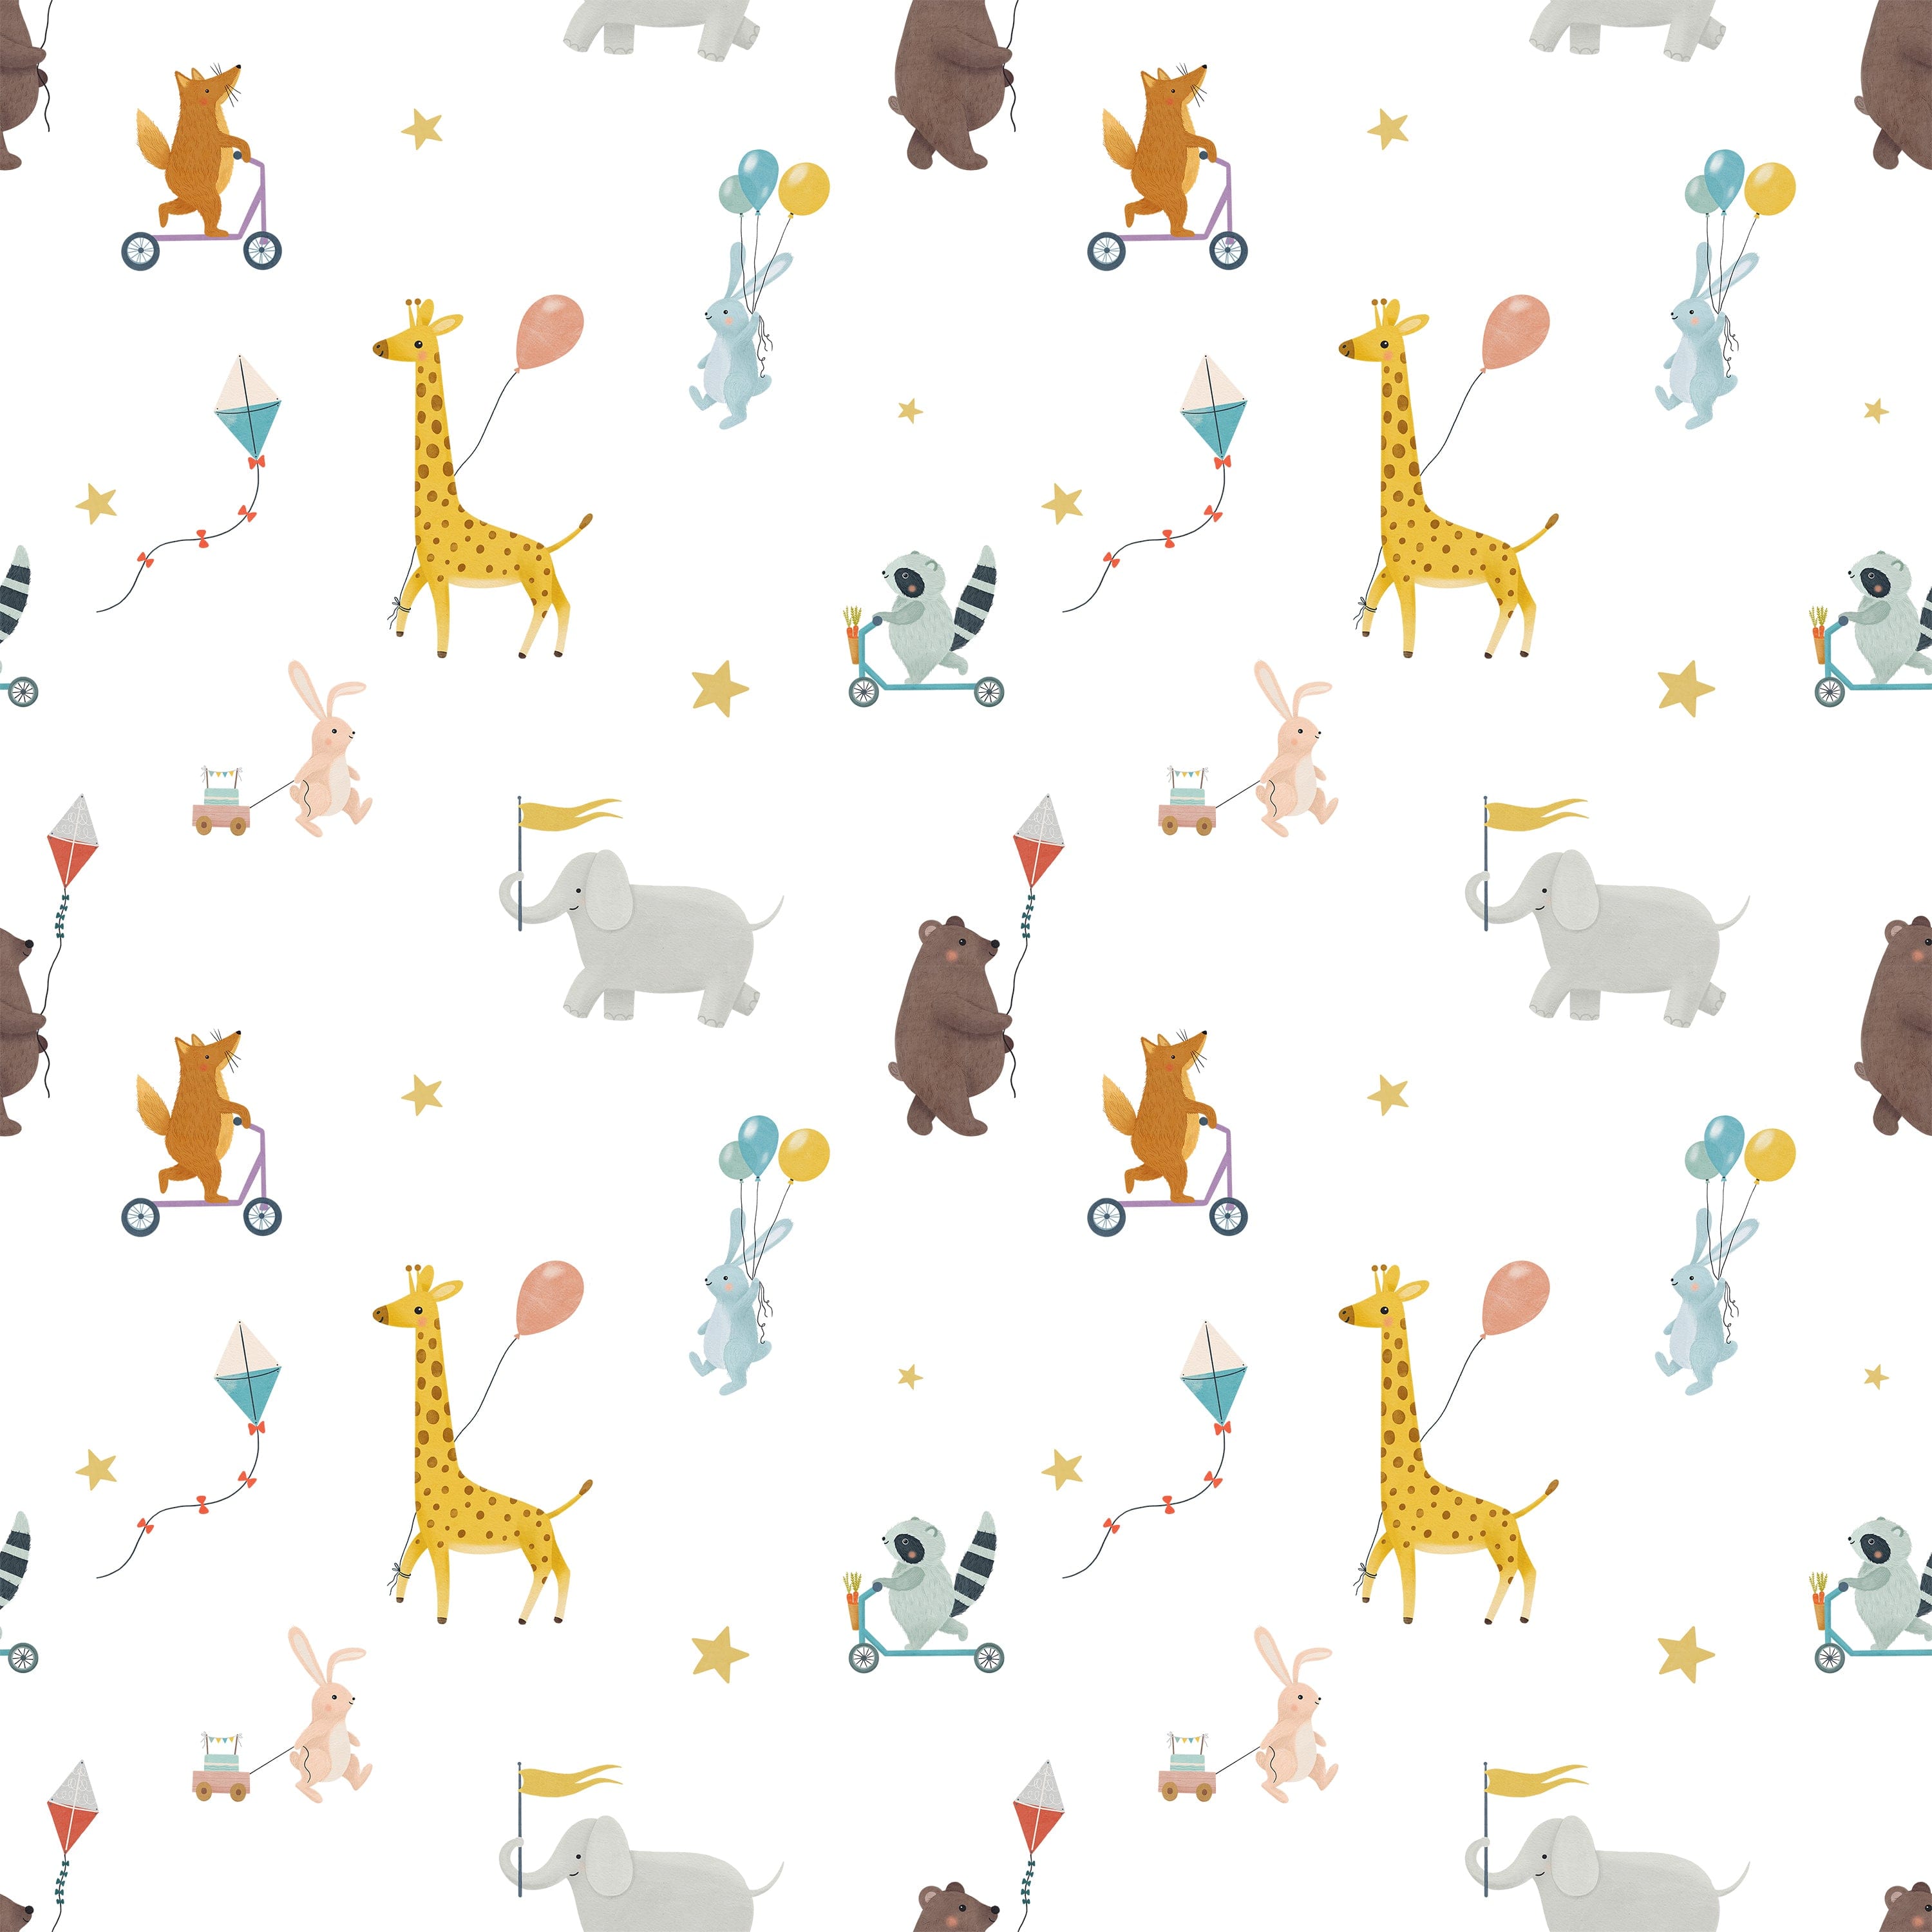 A playful wallpaper pattern featuring various animals engaged in adventurous activities on a white background. Illustrated are bears flying kites, giraffes holding balloons, foxes on scooters, elephants with flags, and other charming scenes interspersed with small golden stars.